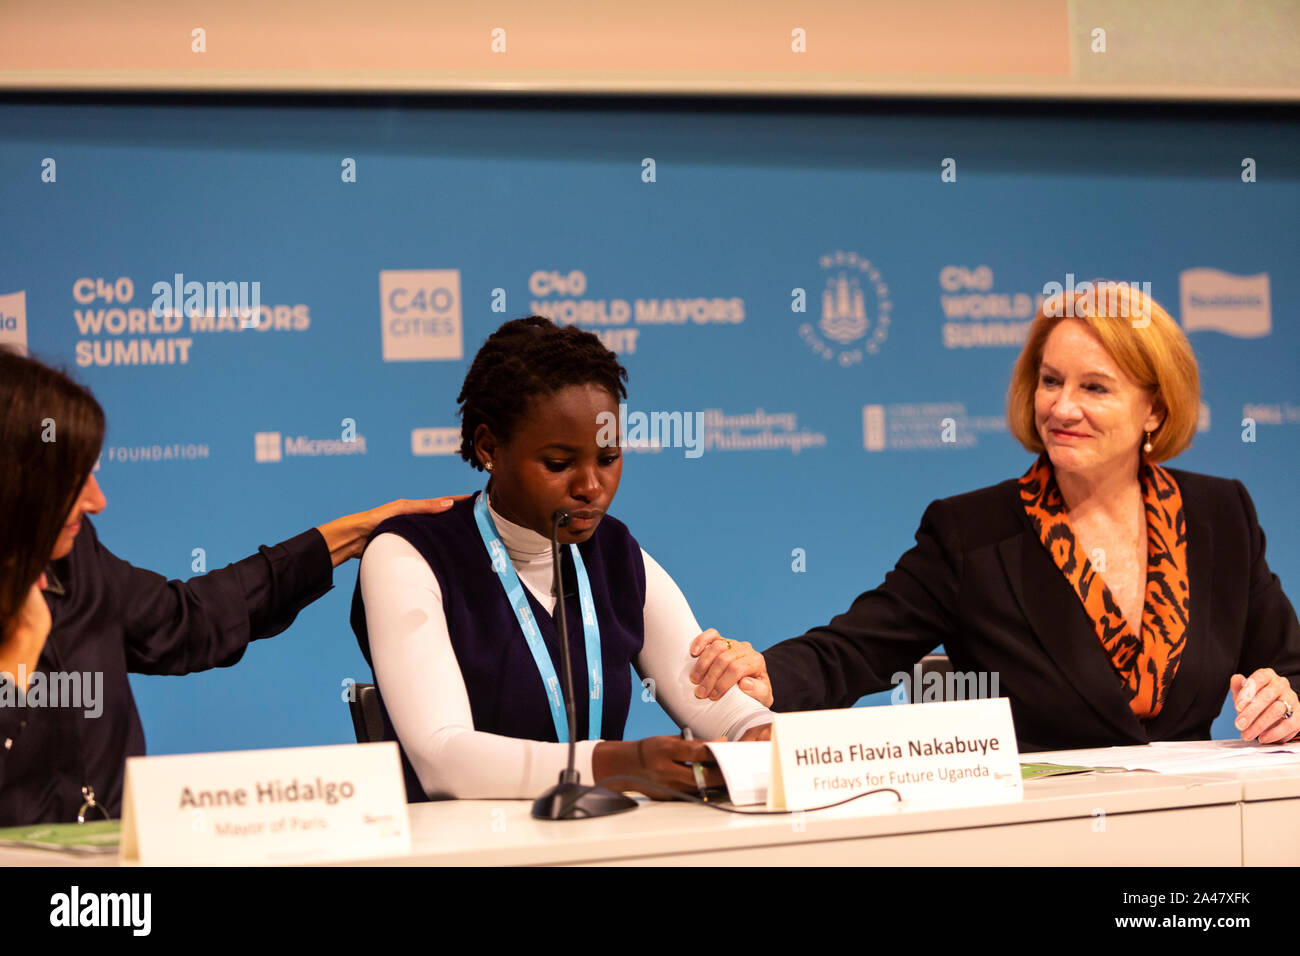 COPENHAGEN, DENMARK – OCTOBER 11, 2019: Hilda Flavia Nakabuye, climate activists within the ‘Fridays for Future’ movement,  Uganda, during the ‘Mayors and Youth Activist’ press conference at the C40 World Mayors Summit. The young activist from Uganda gave a powerful and emotional speech and is here supported by Yvonne Aki-Sawyer (R), Mayor of Freetown, Seattle, and Anne Hidalgo, Mayor of Paris.  During the press conference young activist explained what they expect of the grown-up politicians. More than 90 mayors of some of the world’s largest and most influential cities representing some 700 m Stock Photo